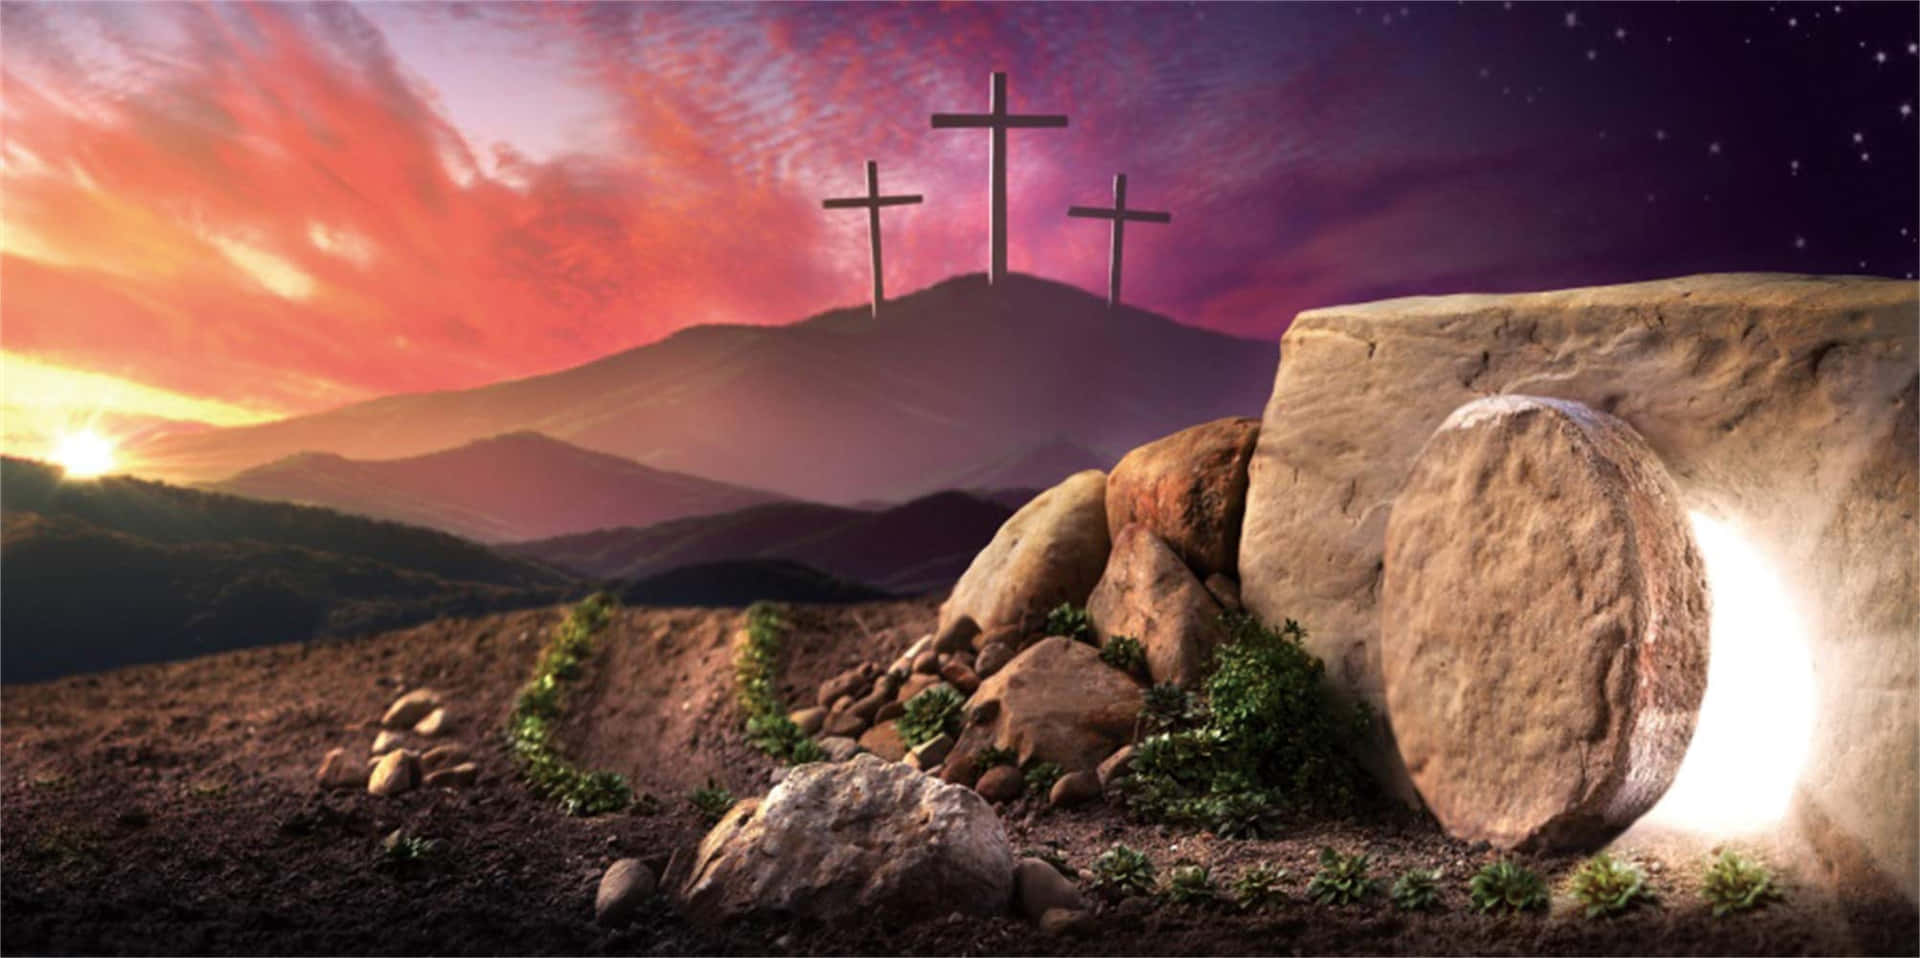 Inspirational Religious Easter Background featuring the Cross on a Hill